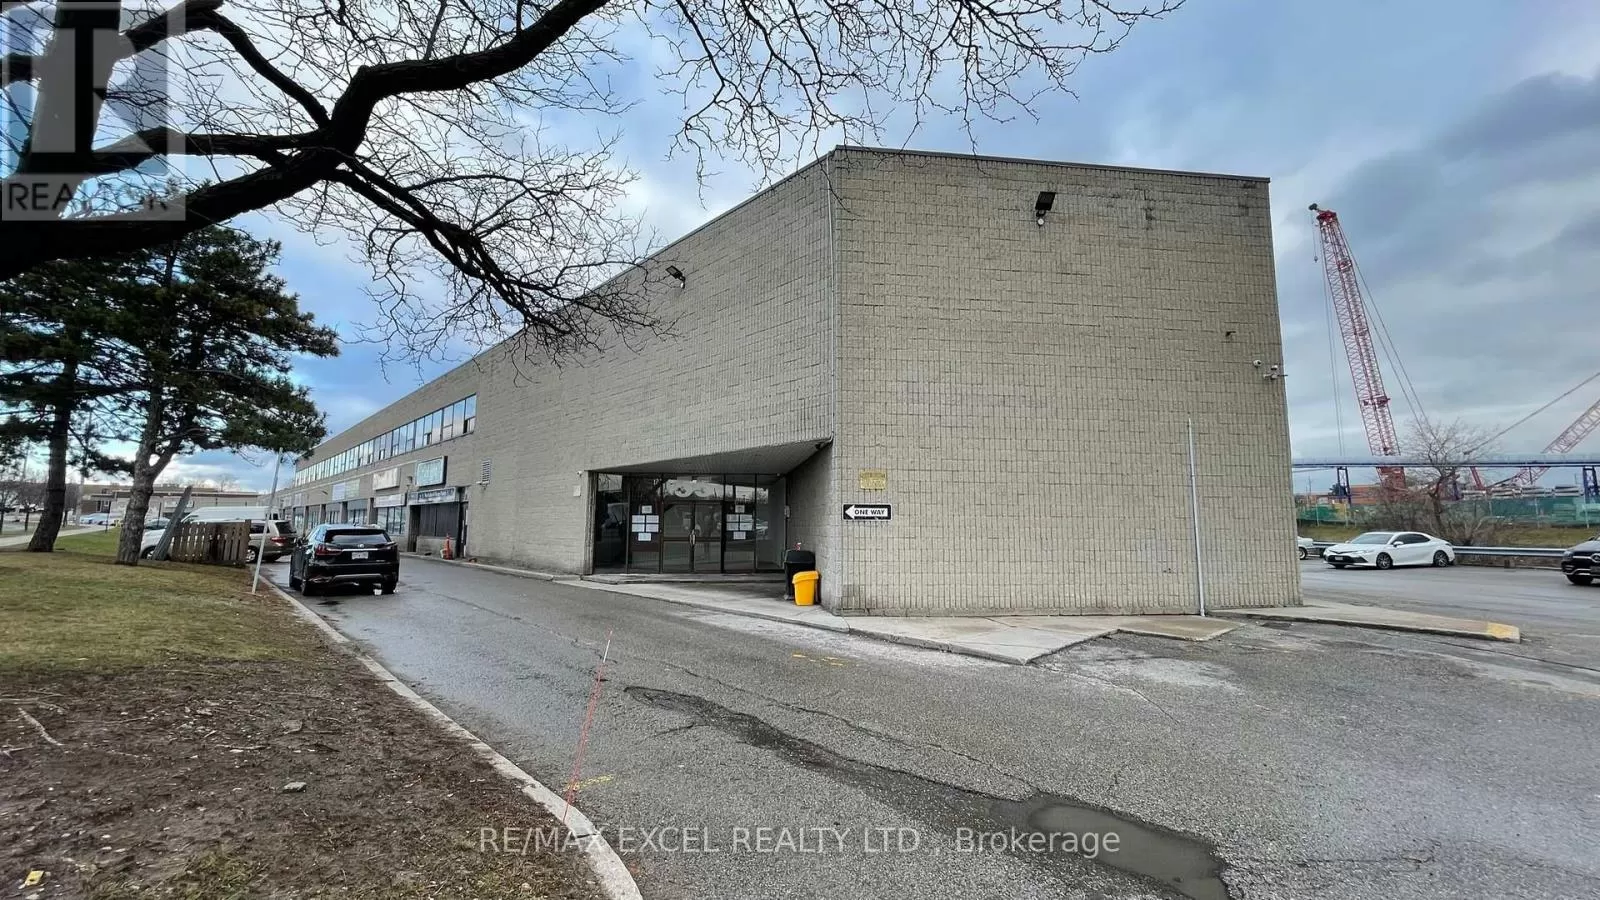 Offices for rent: 230j - 55 Nugget Avenue, Toronto, Ontario M1S 3L1